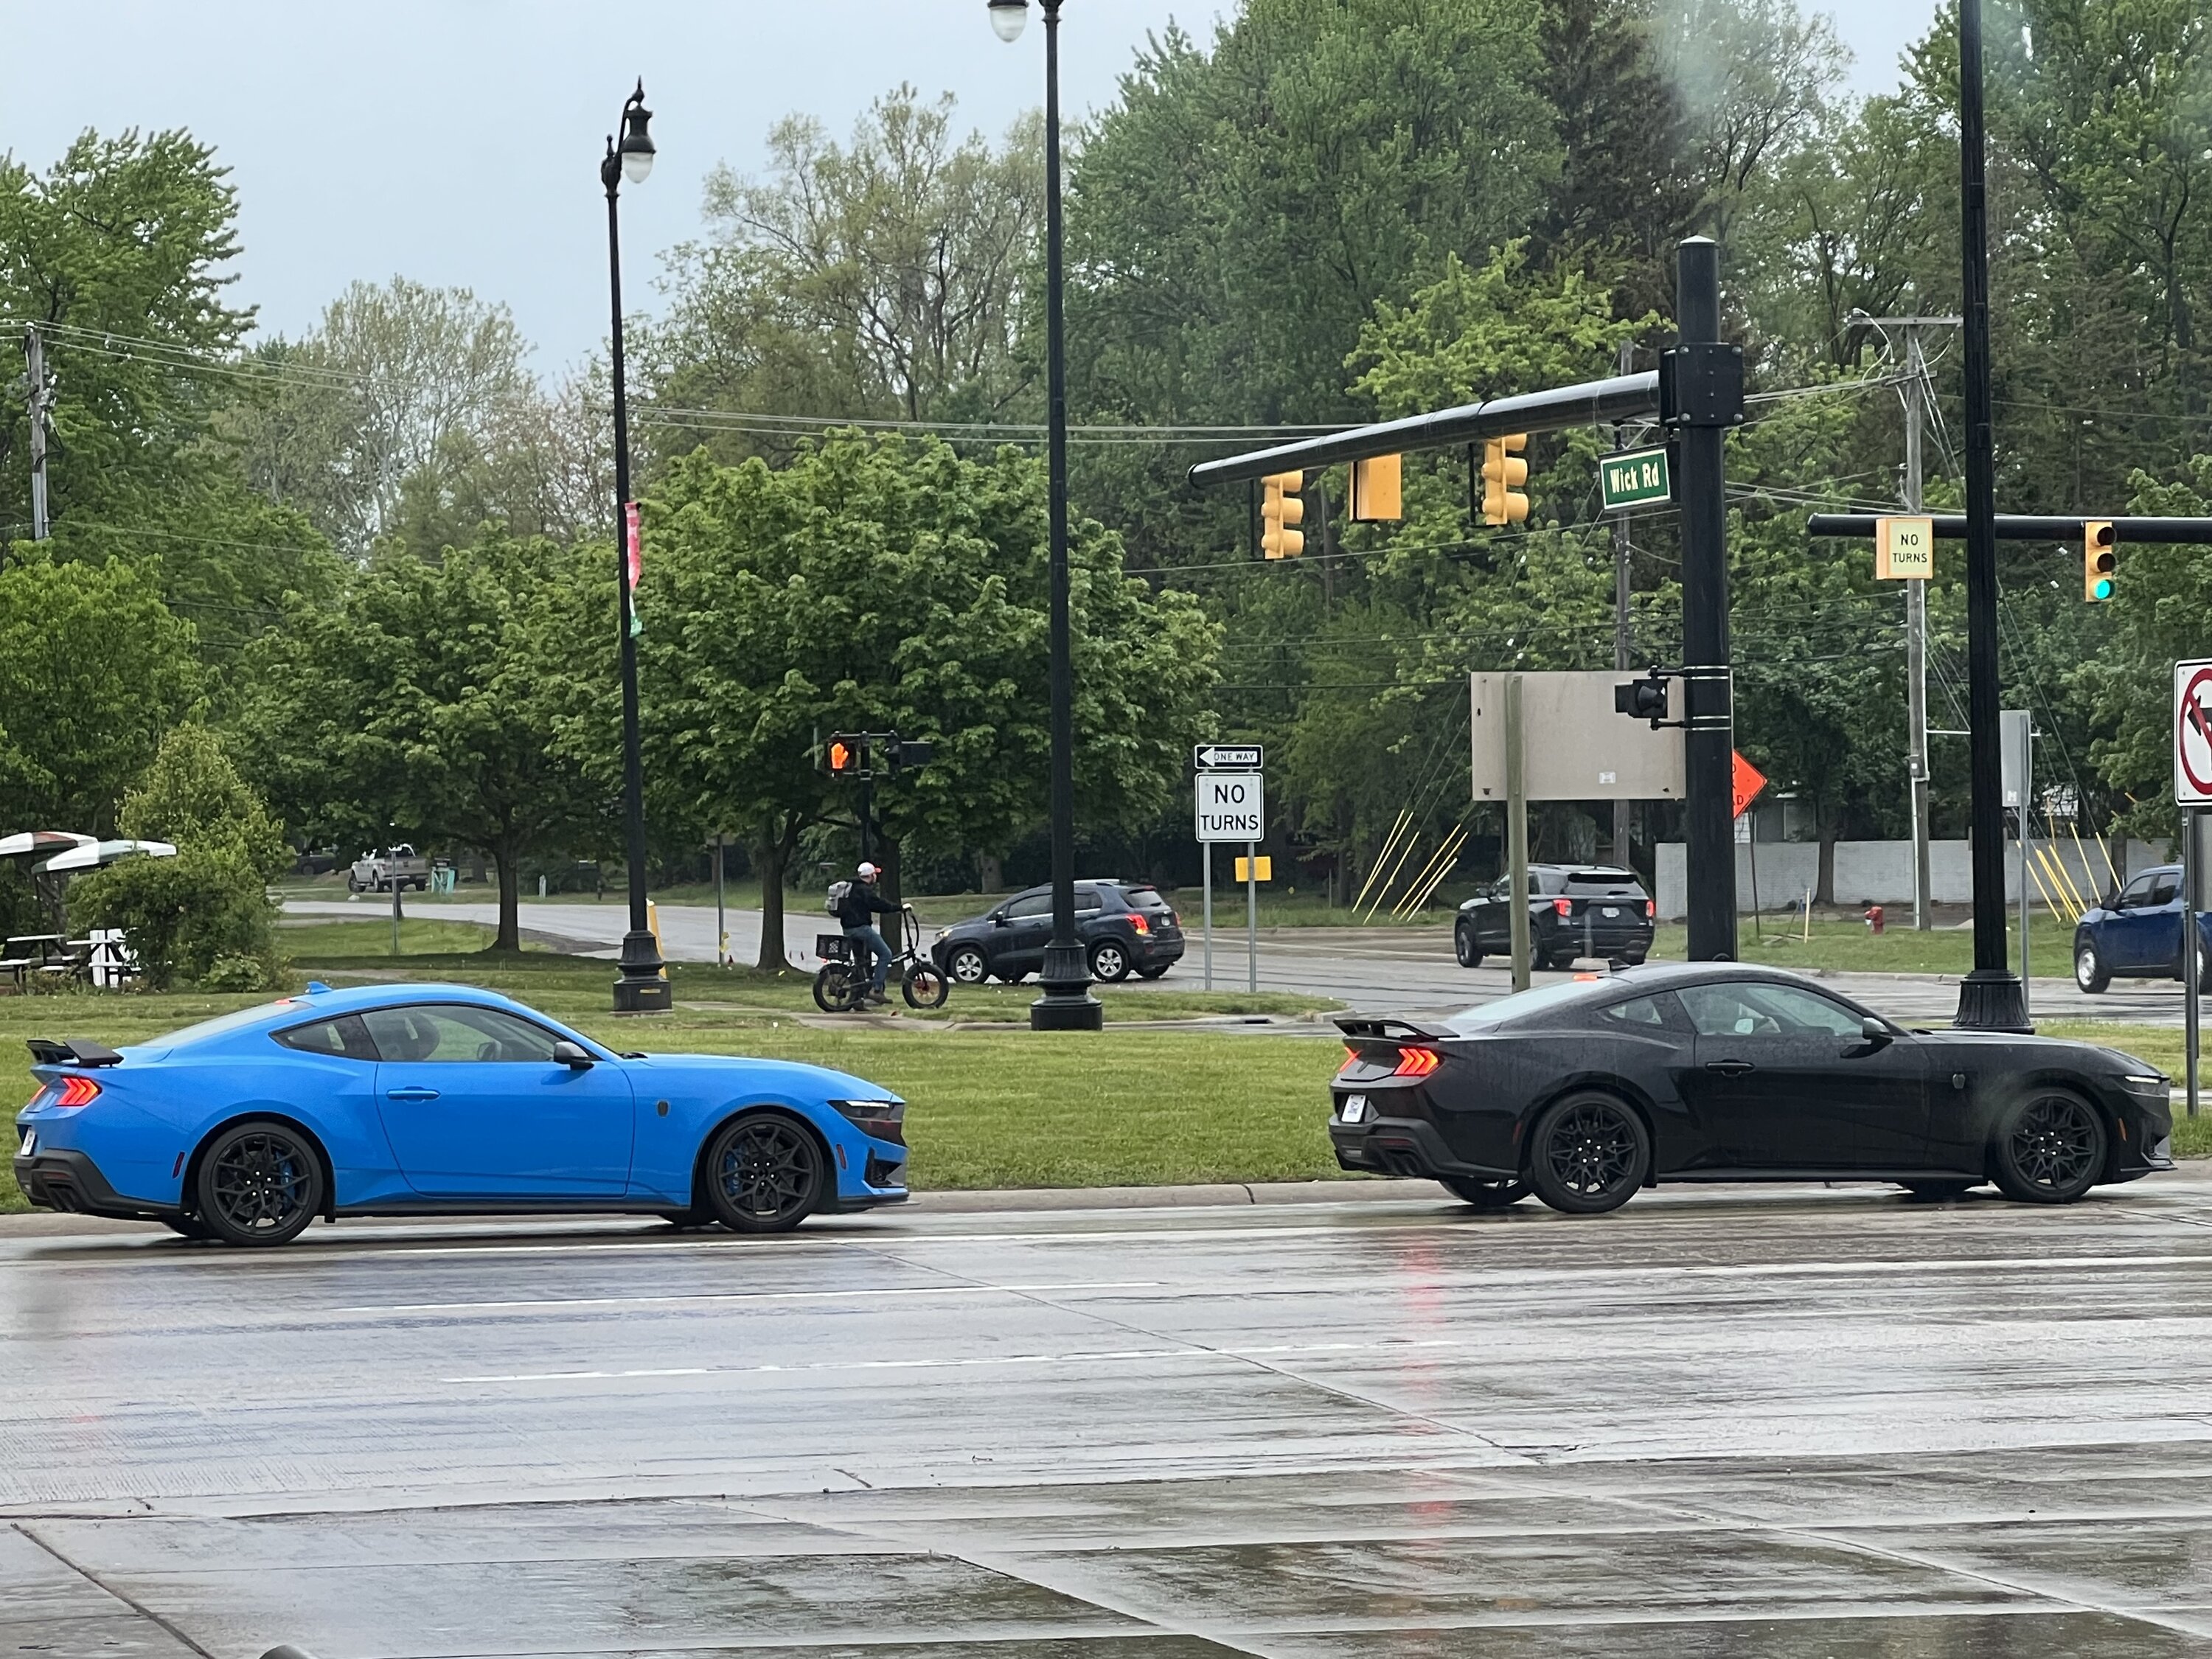 S650 Mustang New Ford Mustang picture video spotted thread! IMG_1035